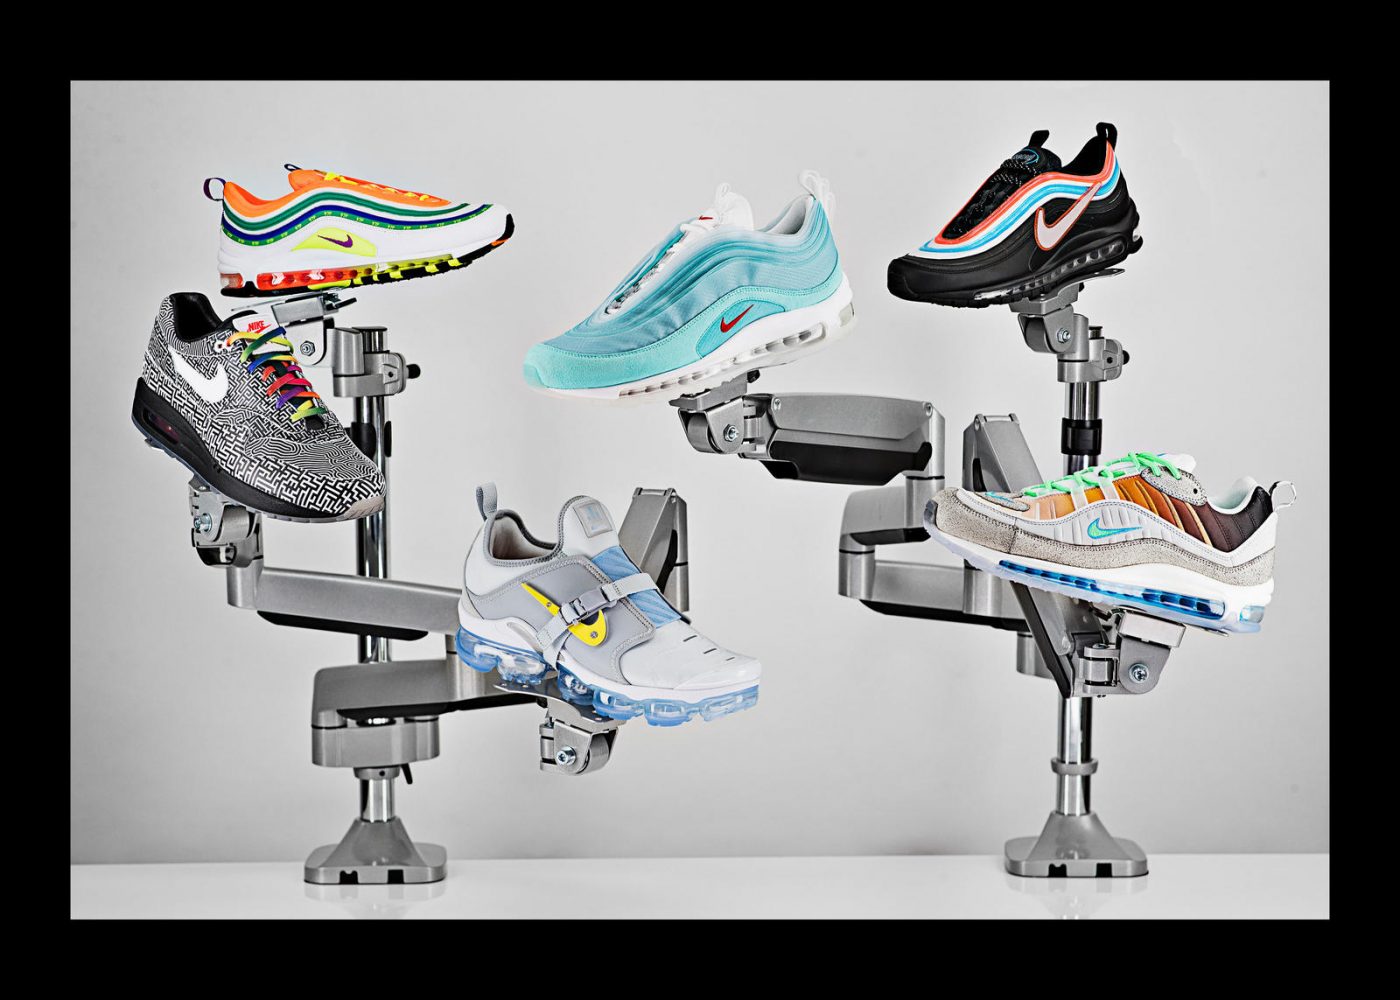 Nike On Air Final April 13 release-01